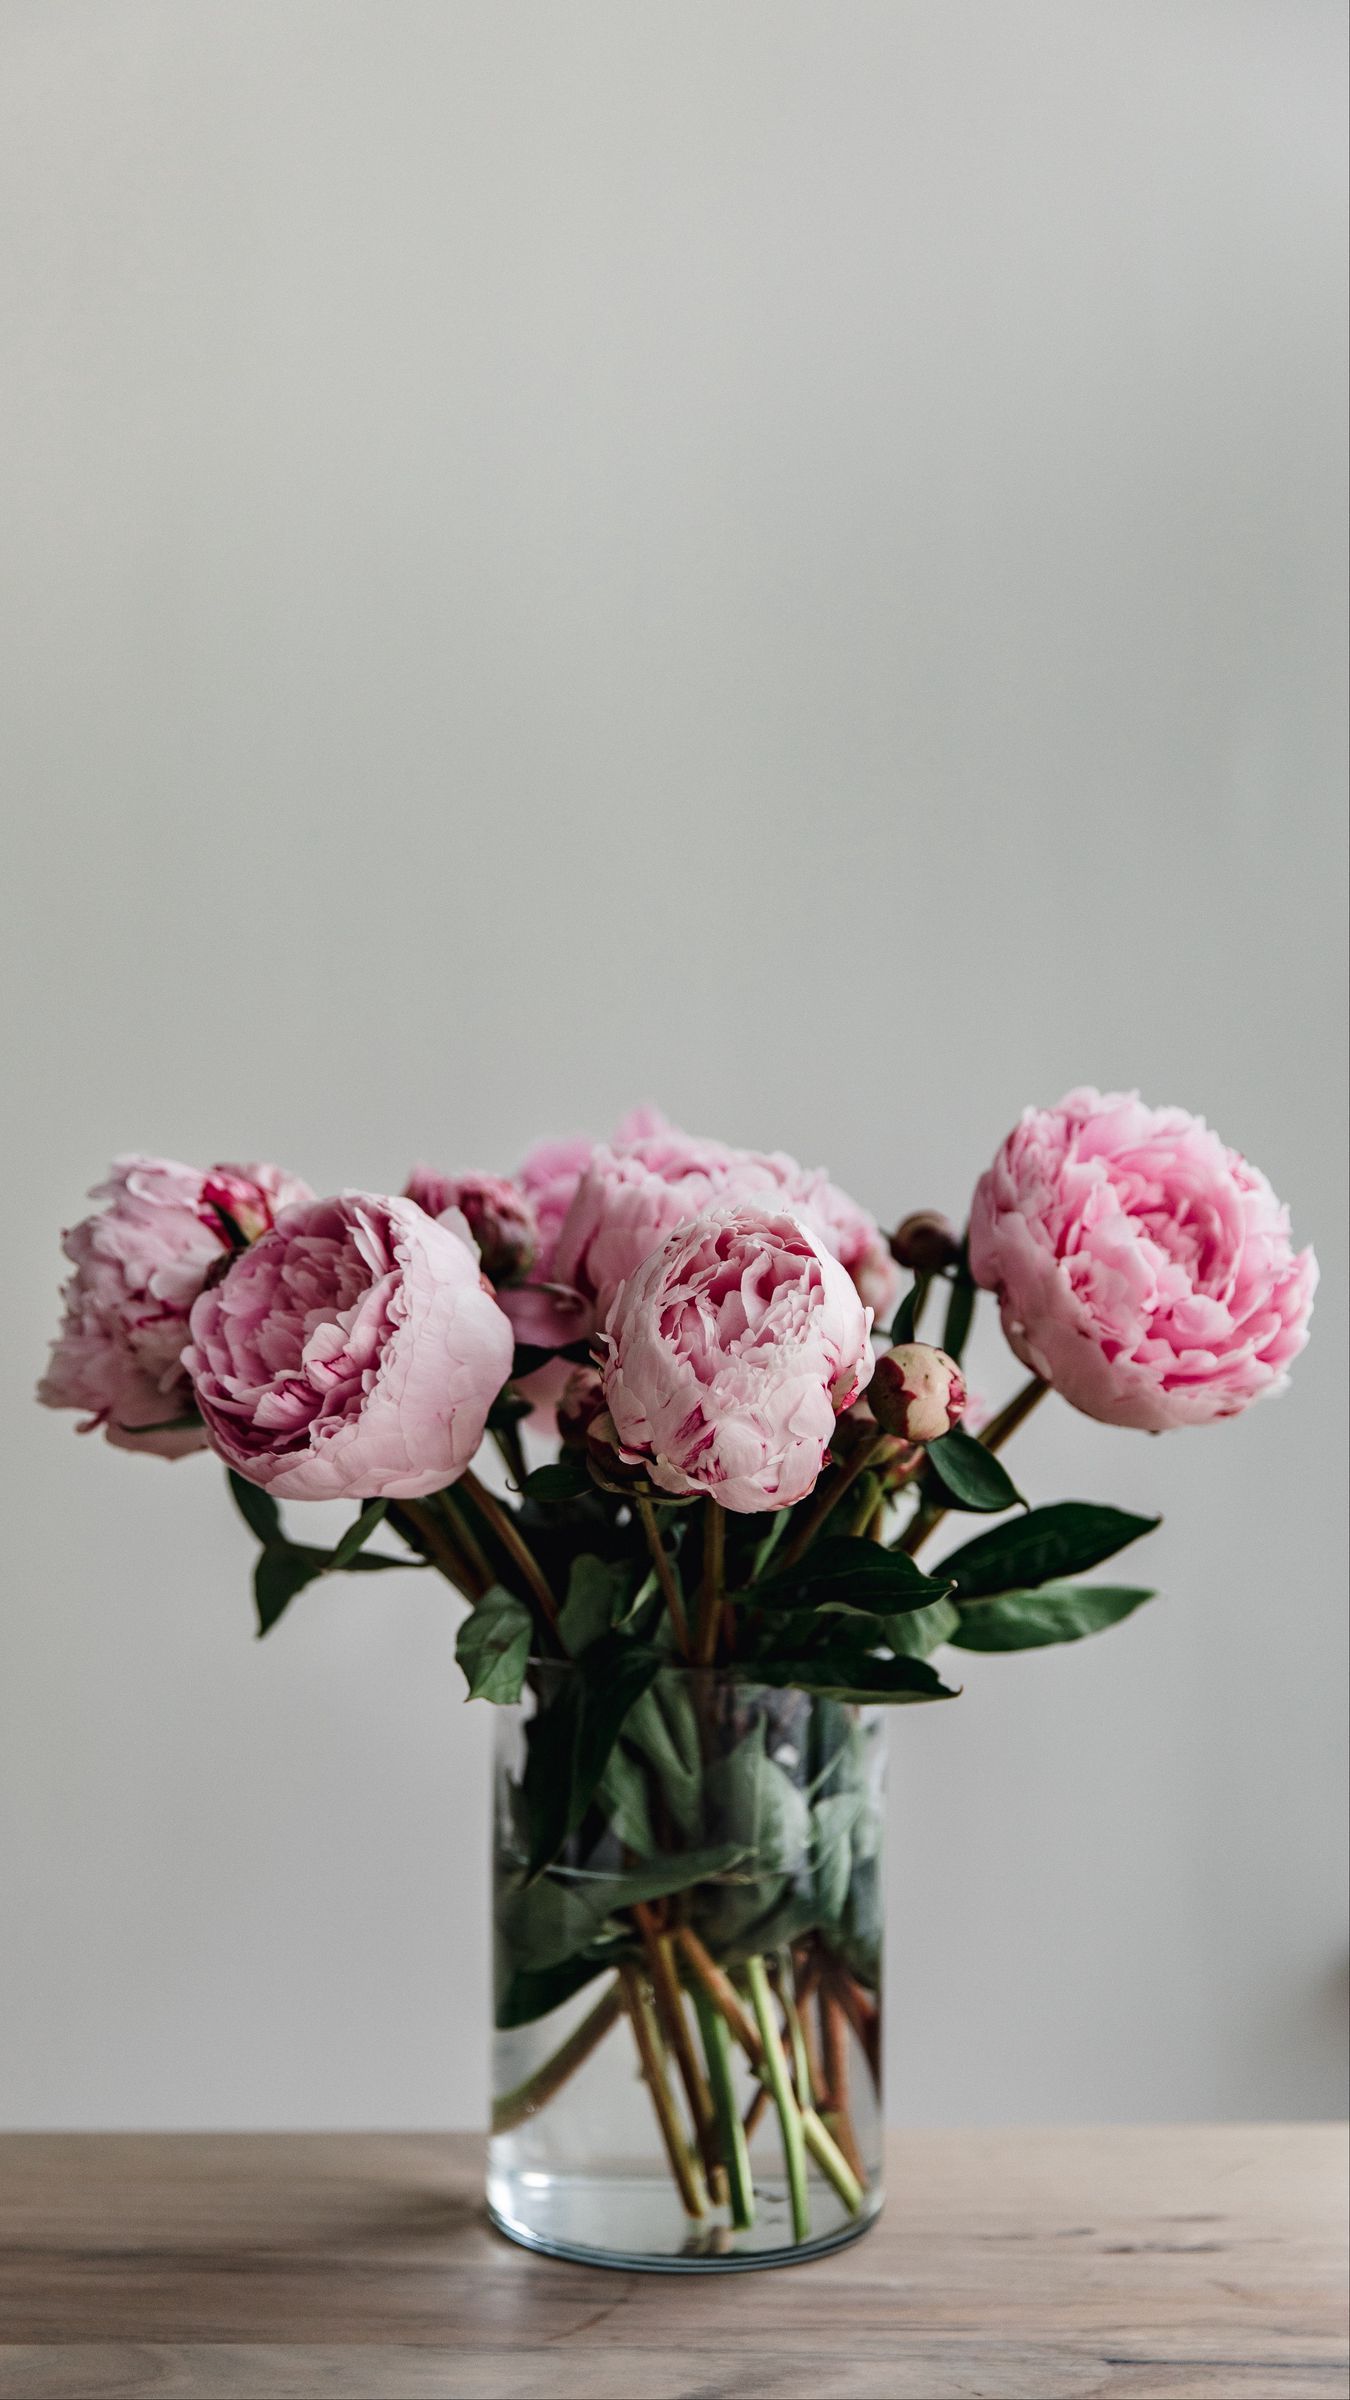 Download wallpaper 1350x2400 peonies, flowers, bouquet, pink, vase iphone 8+/7+/6s+/for parallax HD background